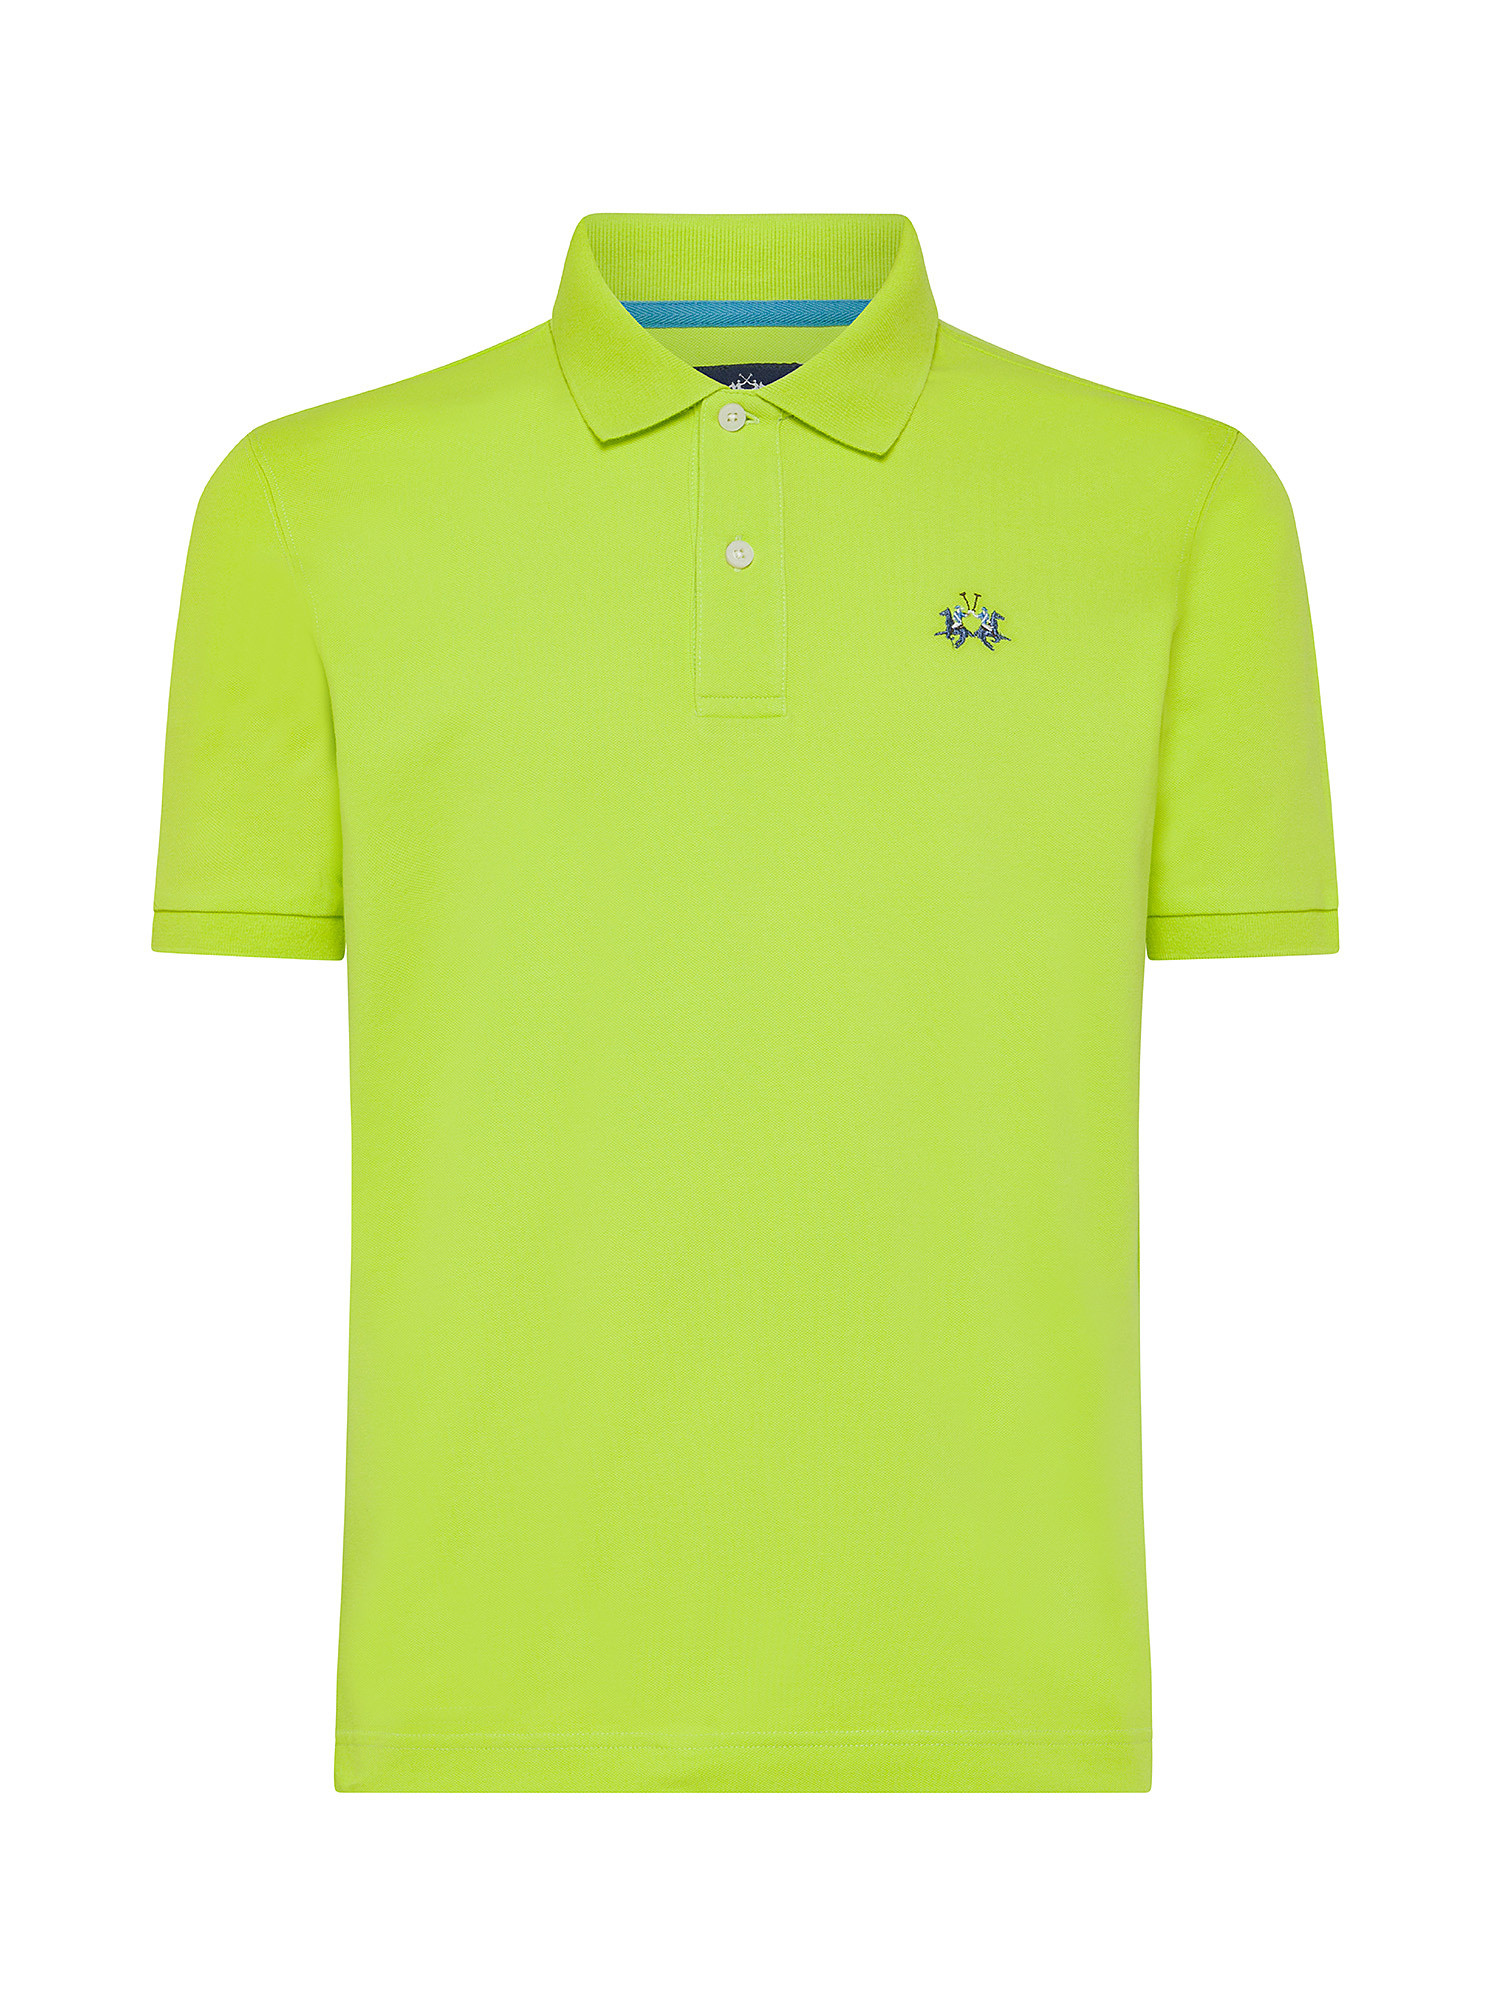 La Martina - Short-sleeved polo shirt in stretch piqué, Yellow, large image number 0